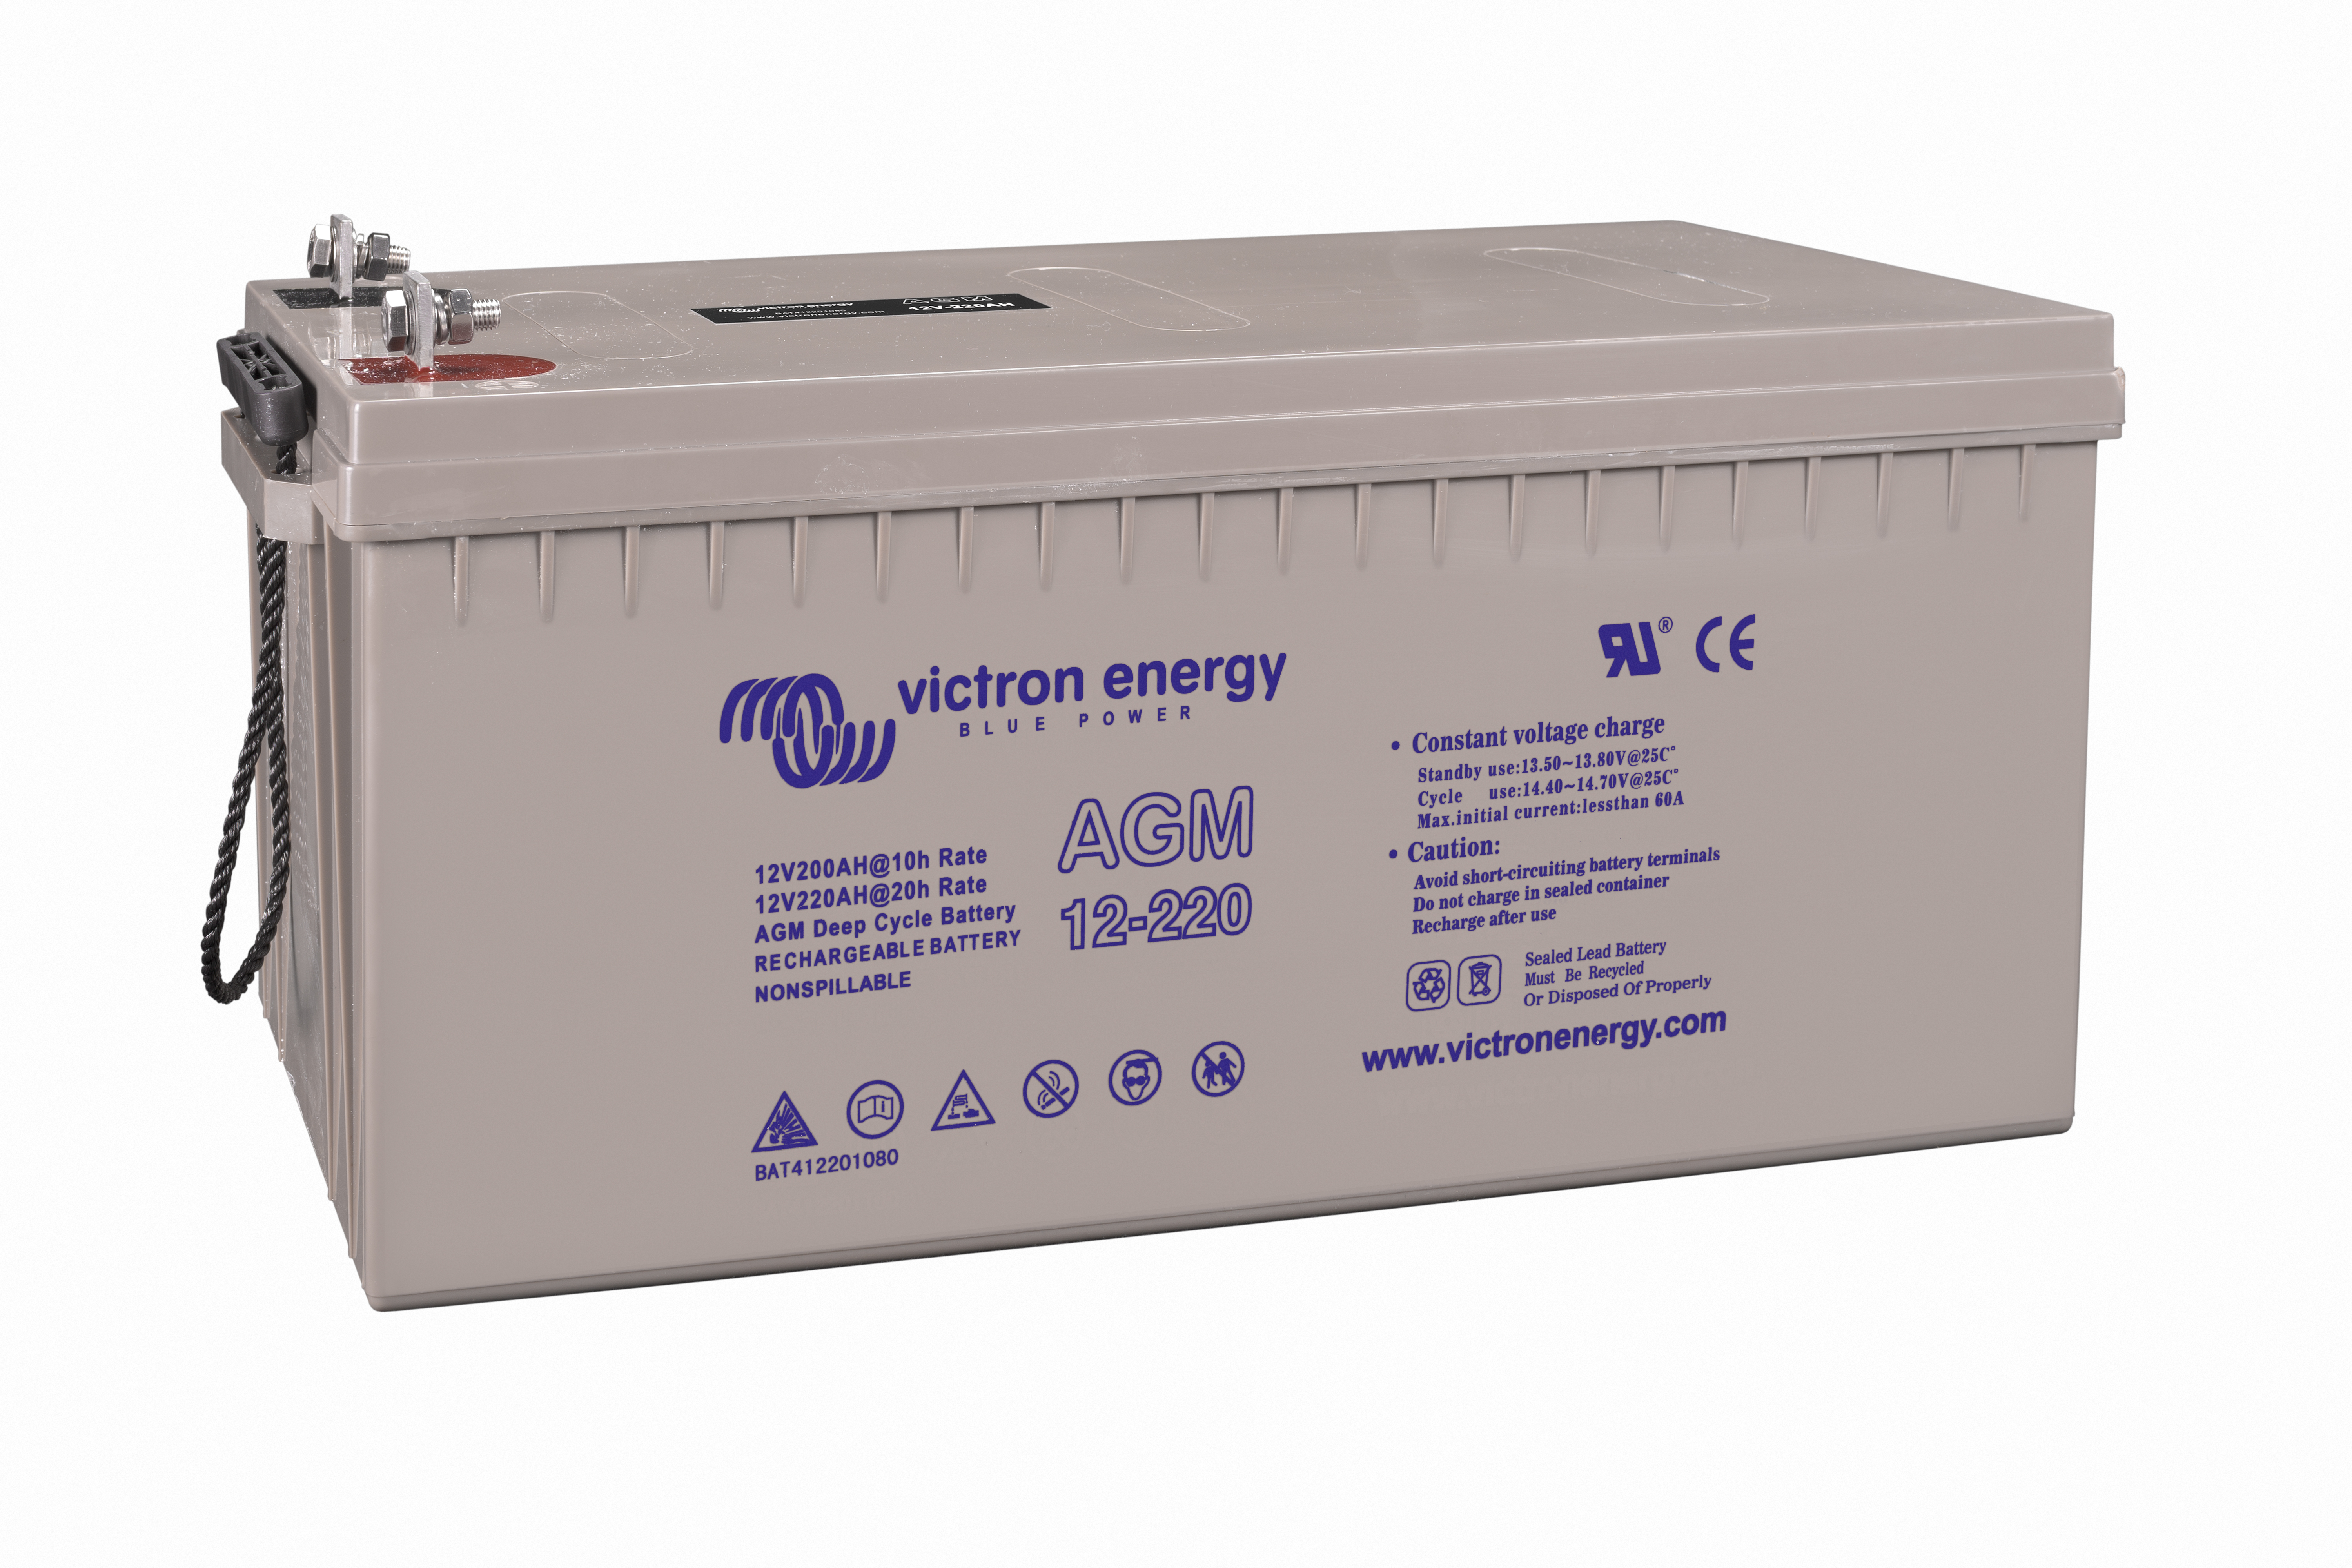 Victron Batterie AGM 12V, 200Ah Telecom (20h) - Batteries Smart Energy Shop  - Specialist in Victron Energy and Fischer Panda hybrid energy